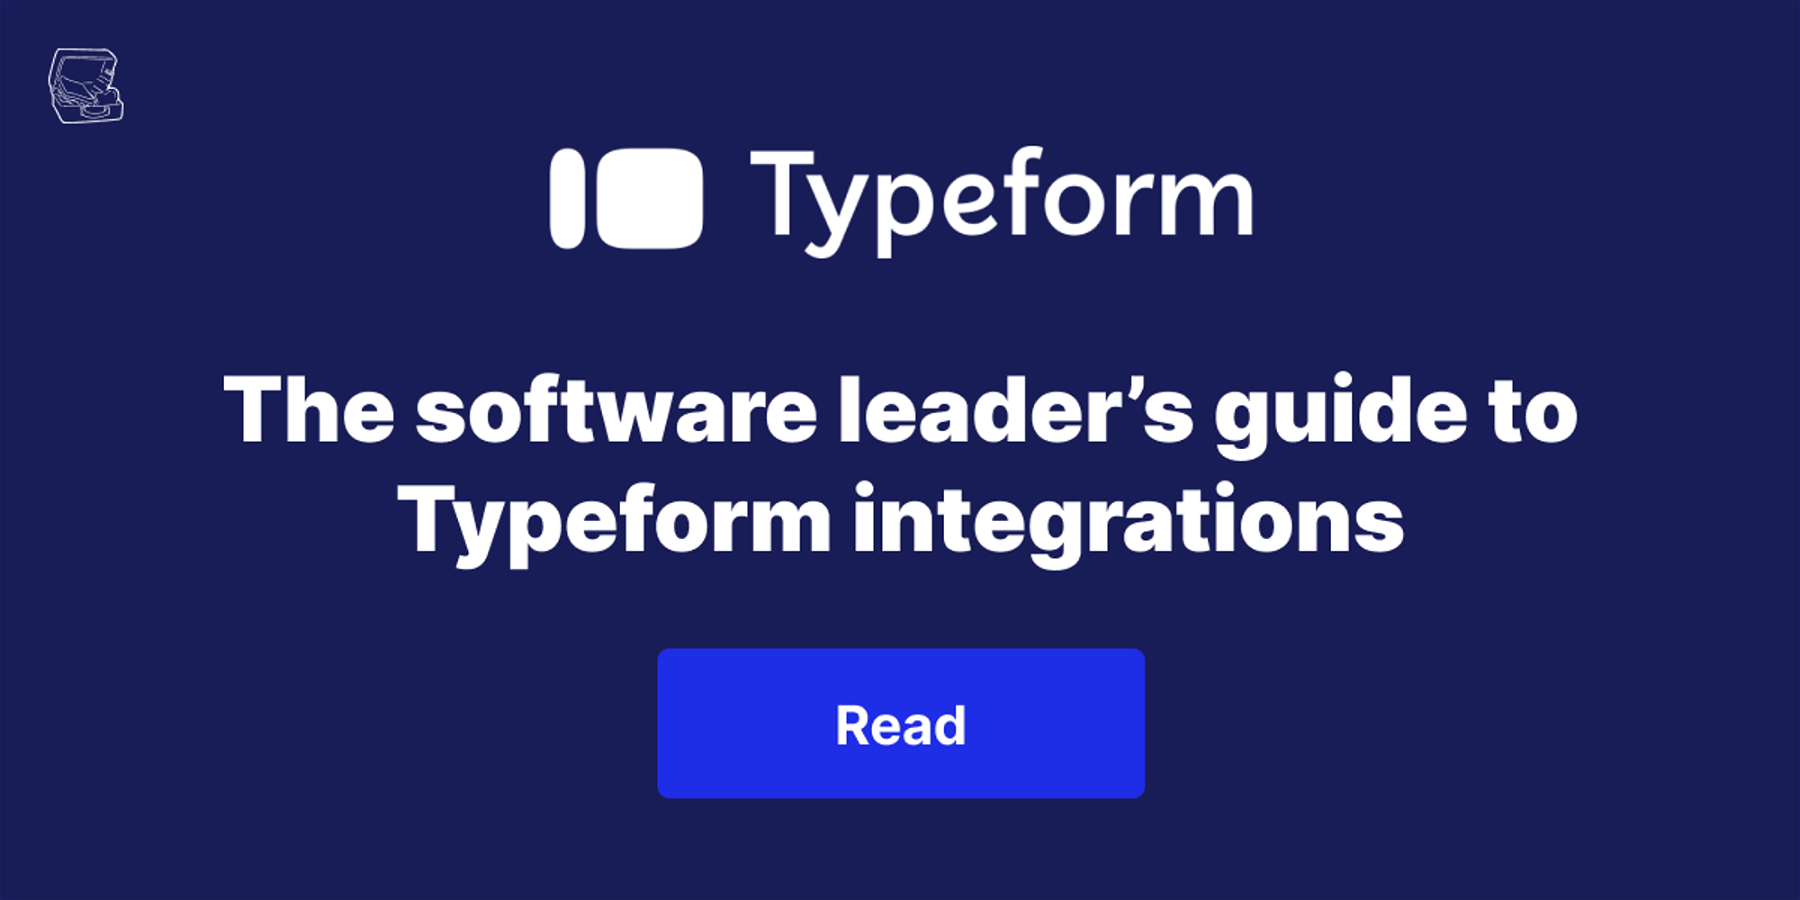 The software leader’s guide to Typeform Integrations